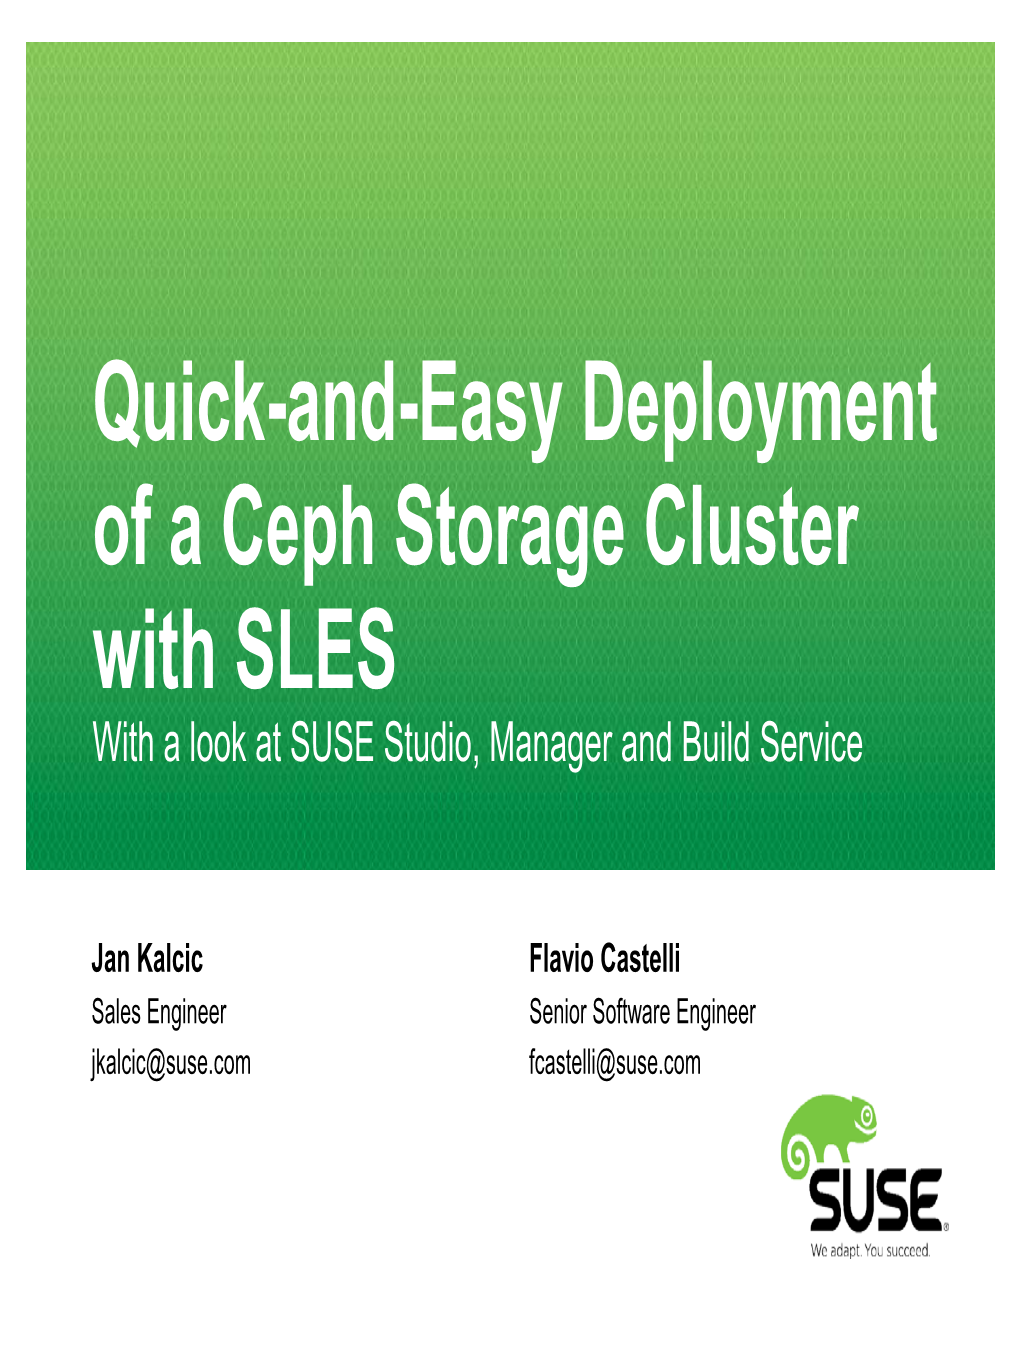 Quick-And-Easy Deployment of a Ceph Storage Cluster with SLES with a Look at SUSE Studio, Manager and Build Service